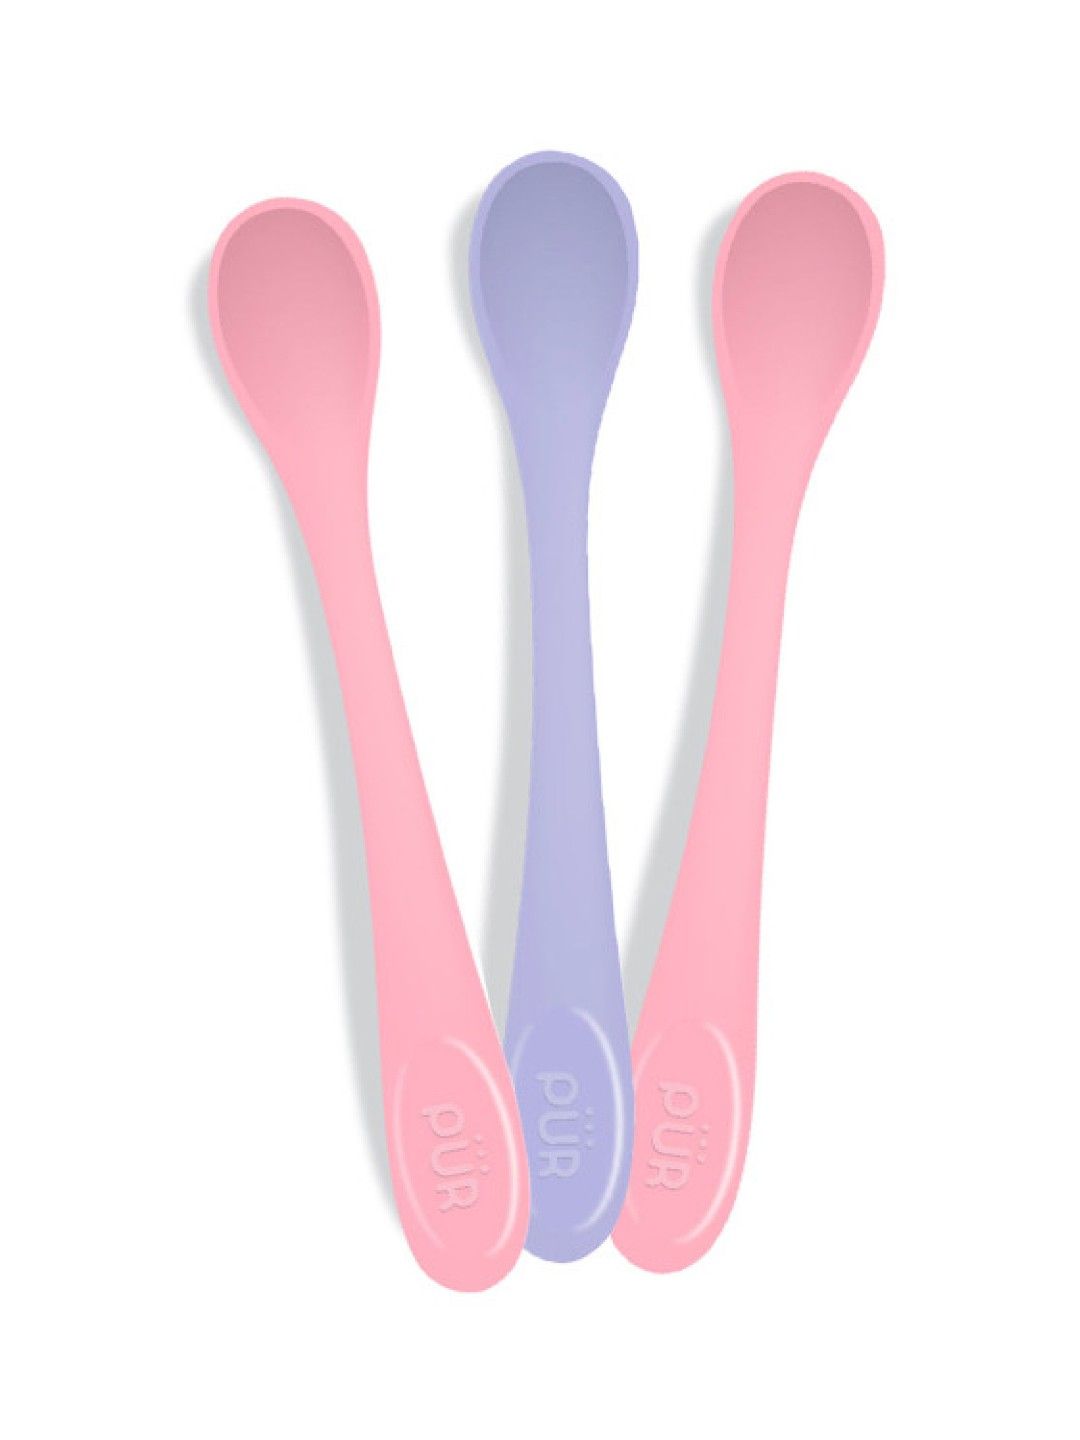 Pur Long Handle Spoons (Pack of 3)